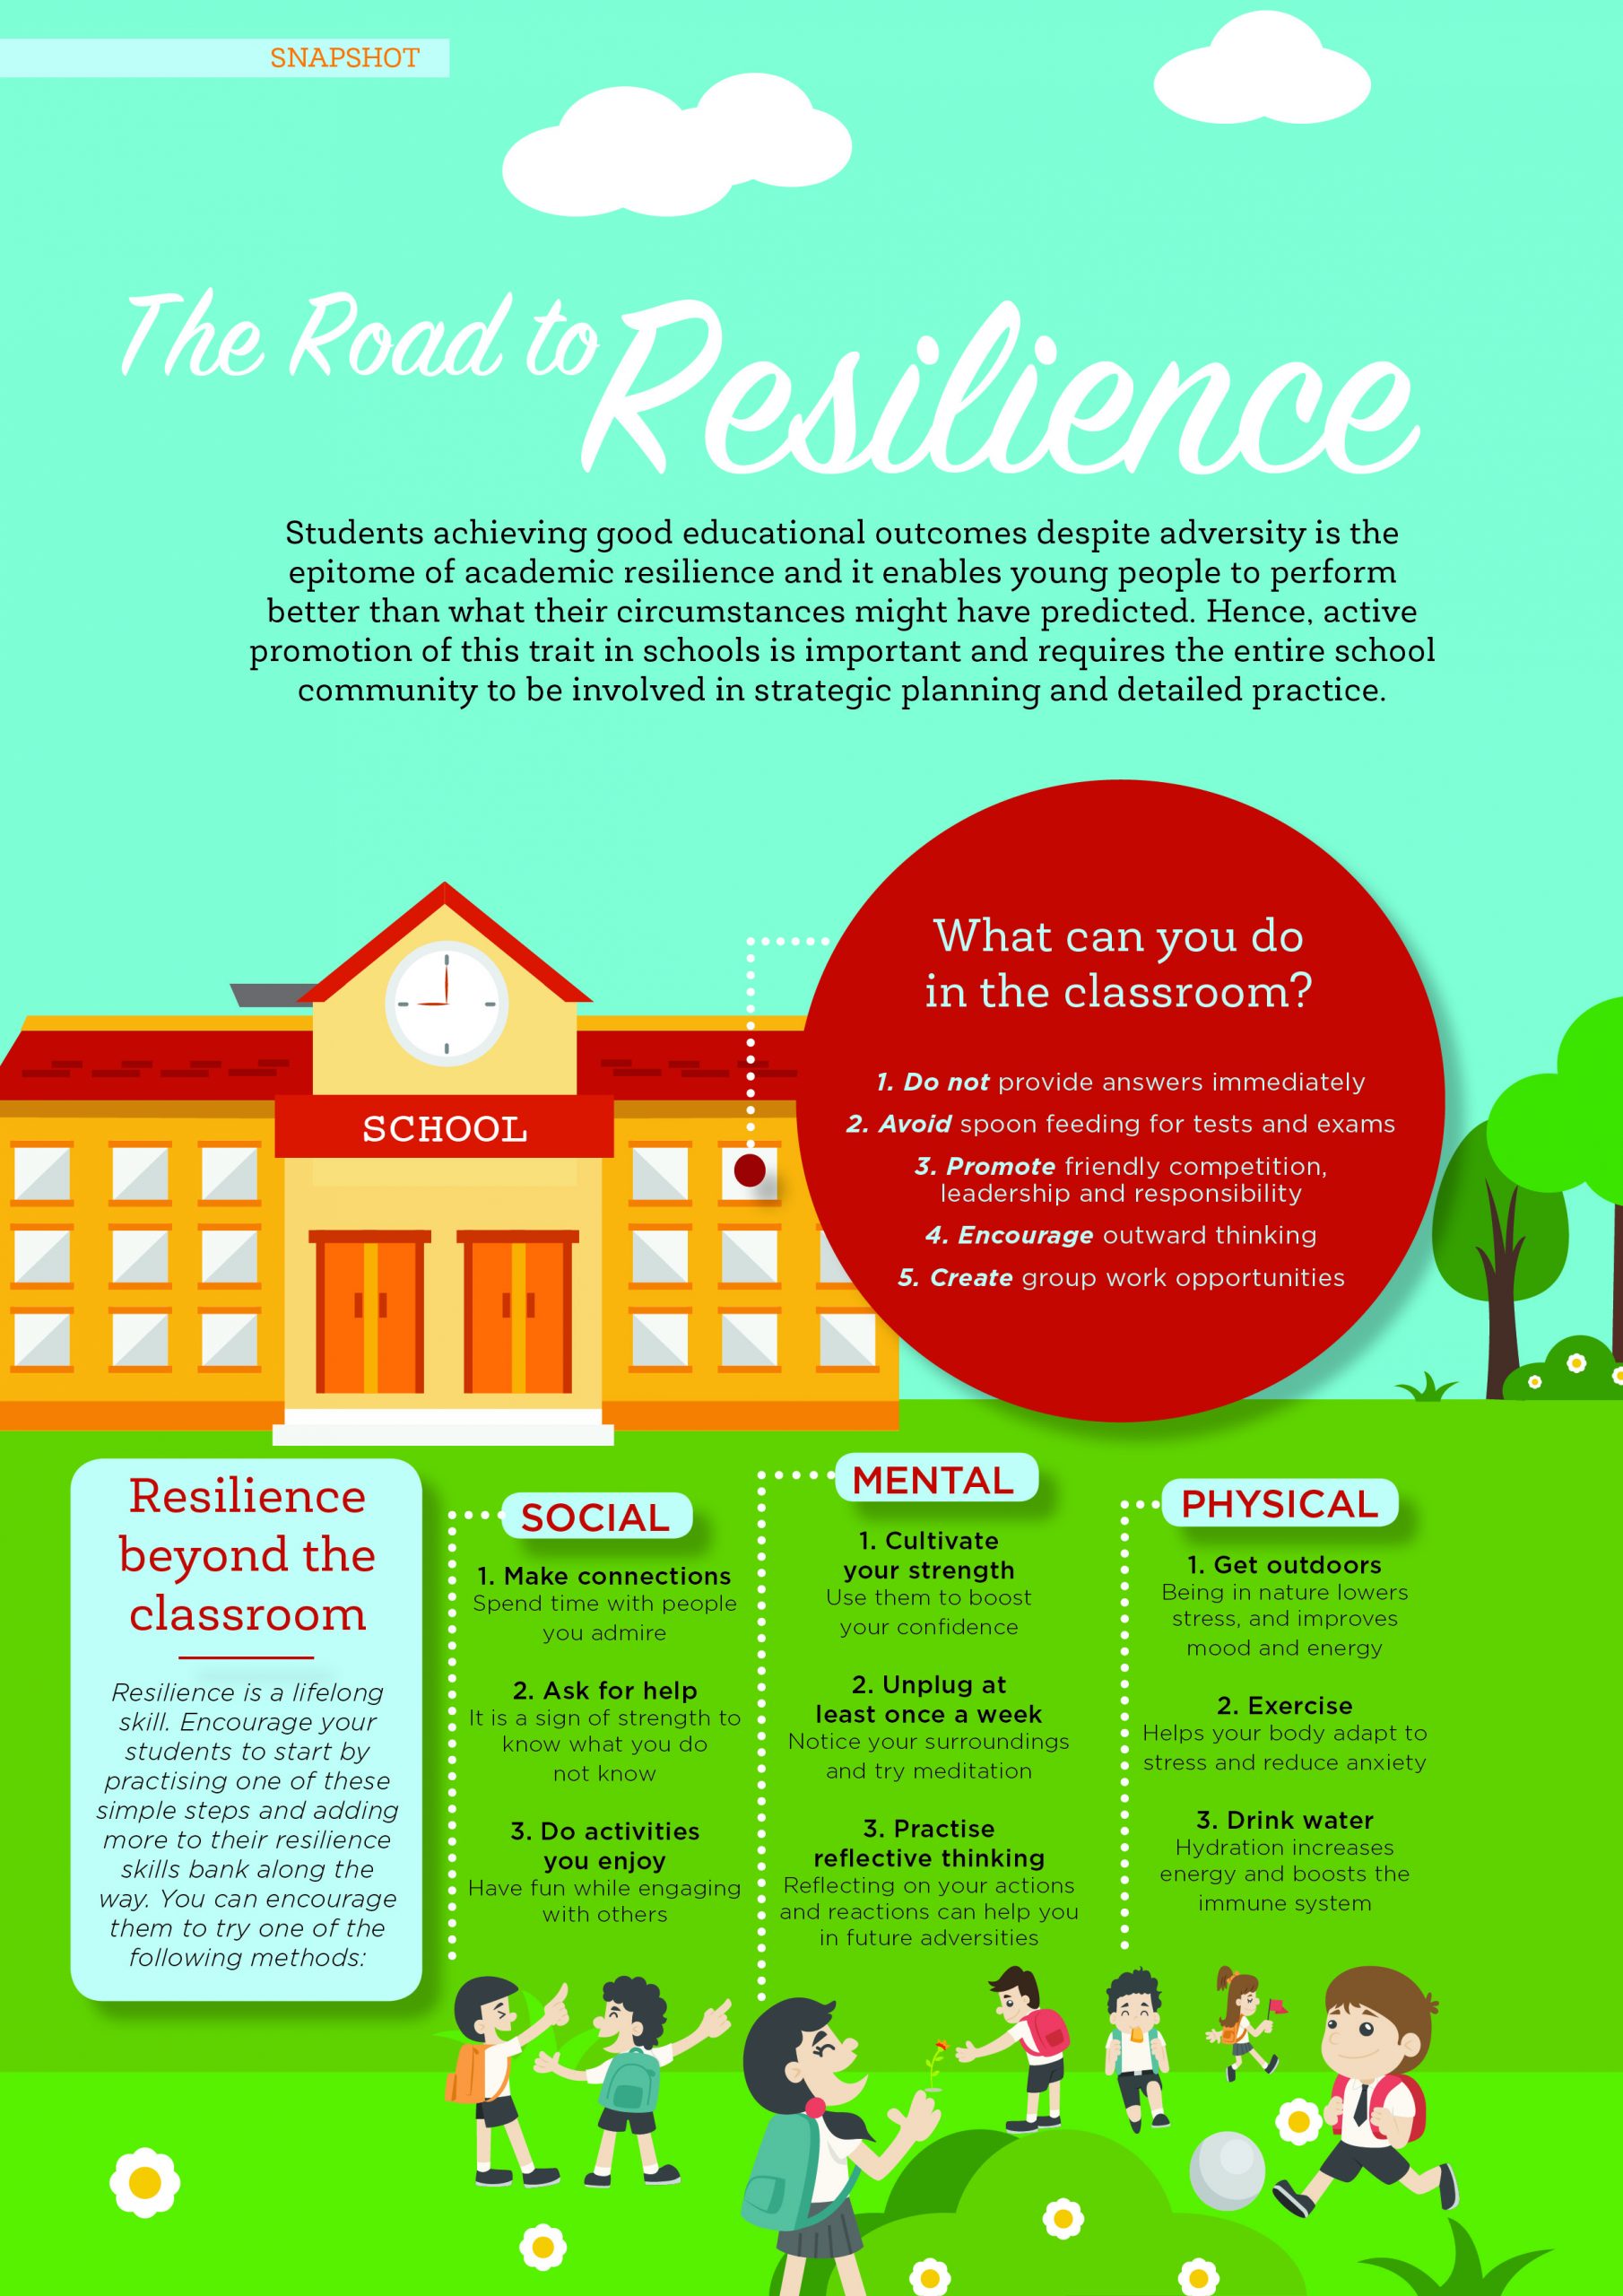 Snapshot: The Road to Resilience